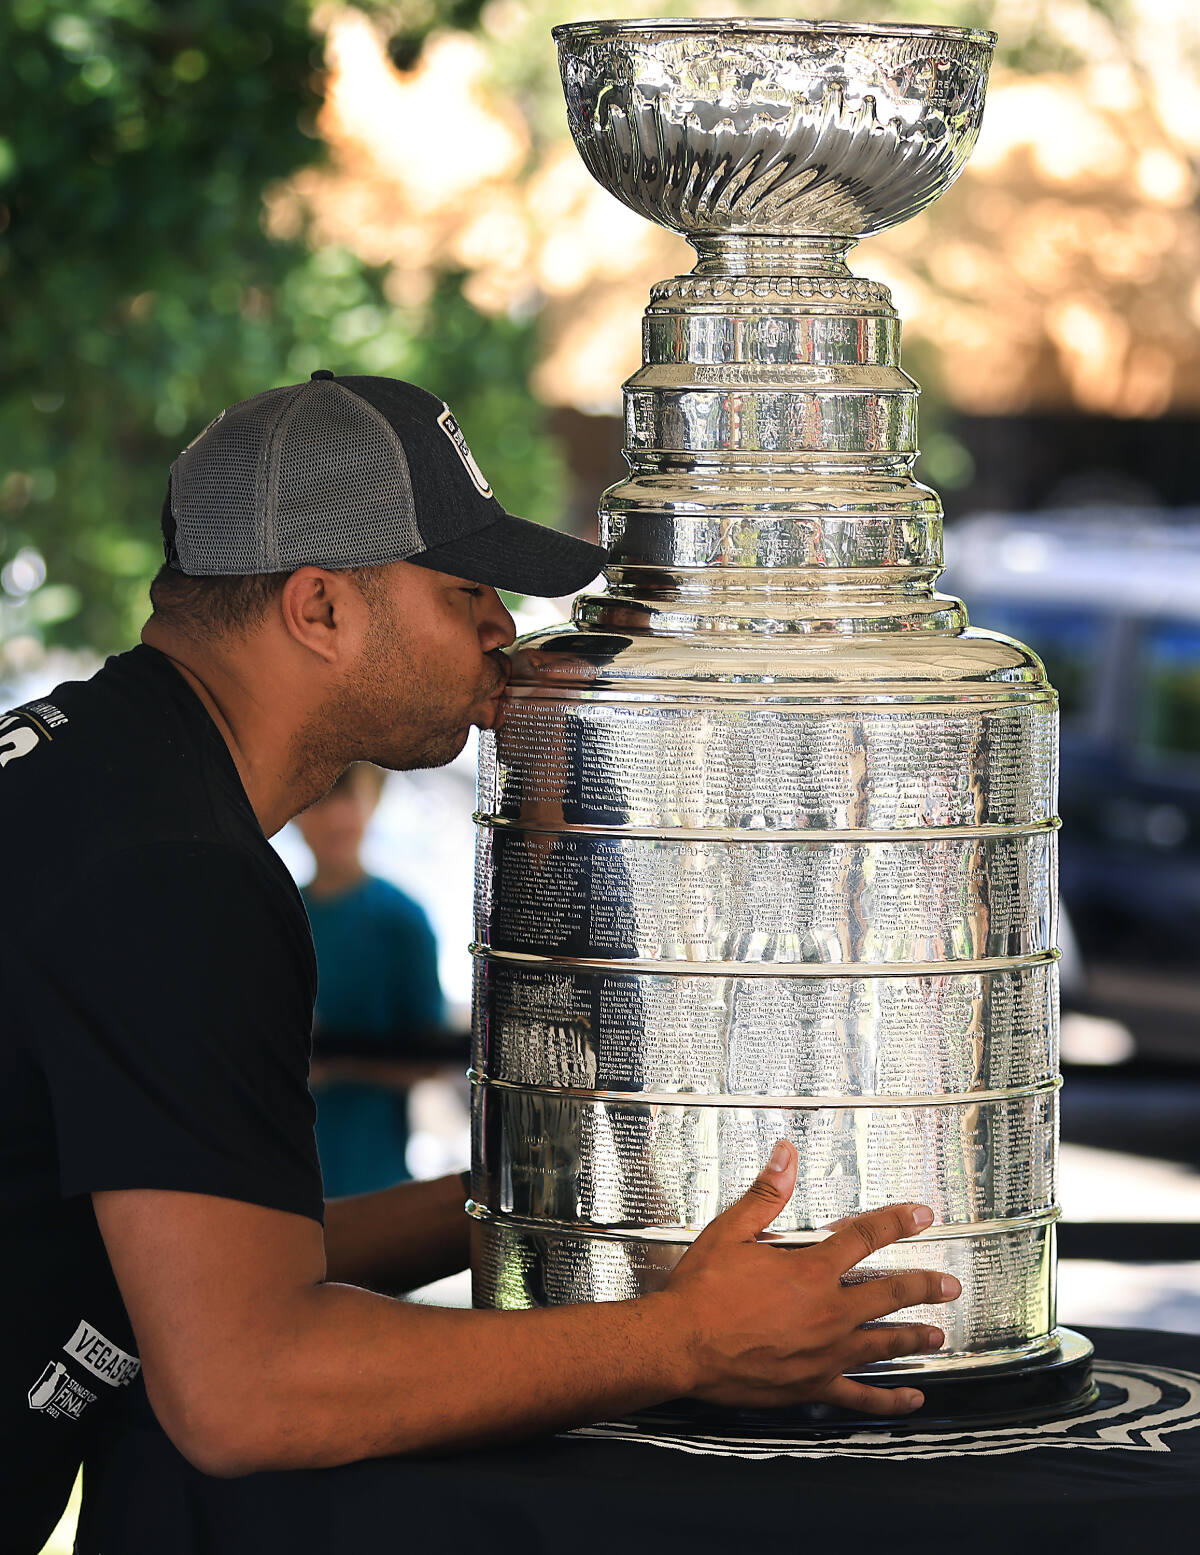 Stanley Cup gets the kids' attention at Tustin school – Orange County  Register